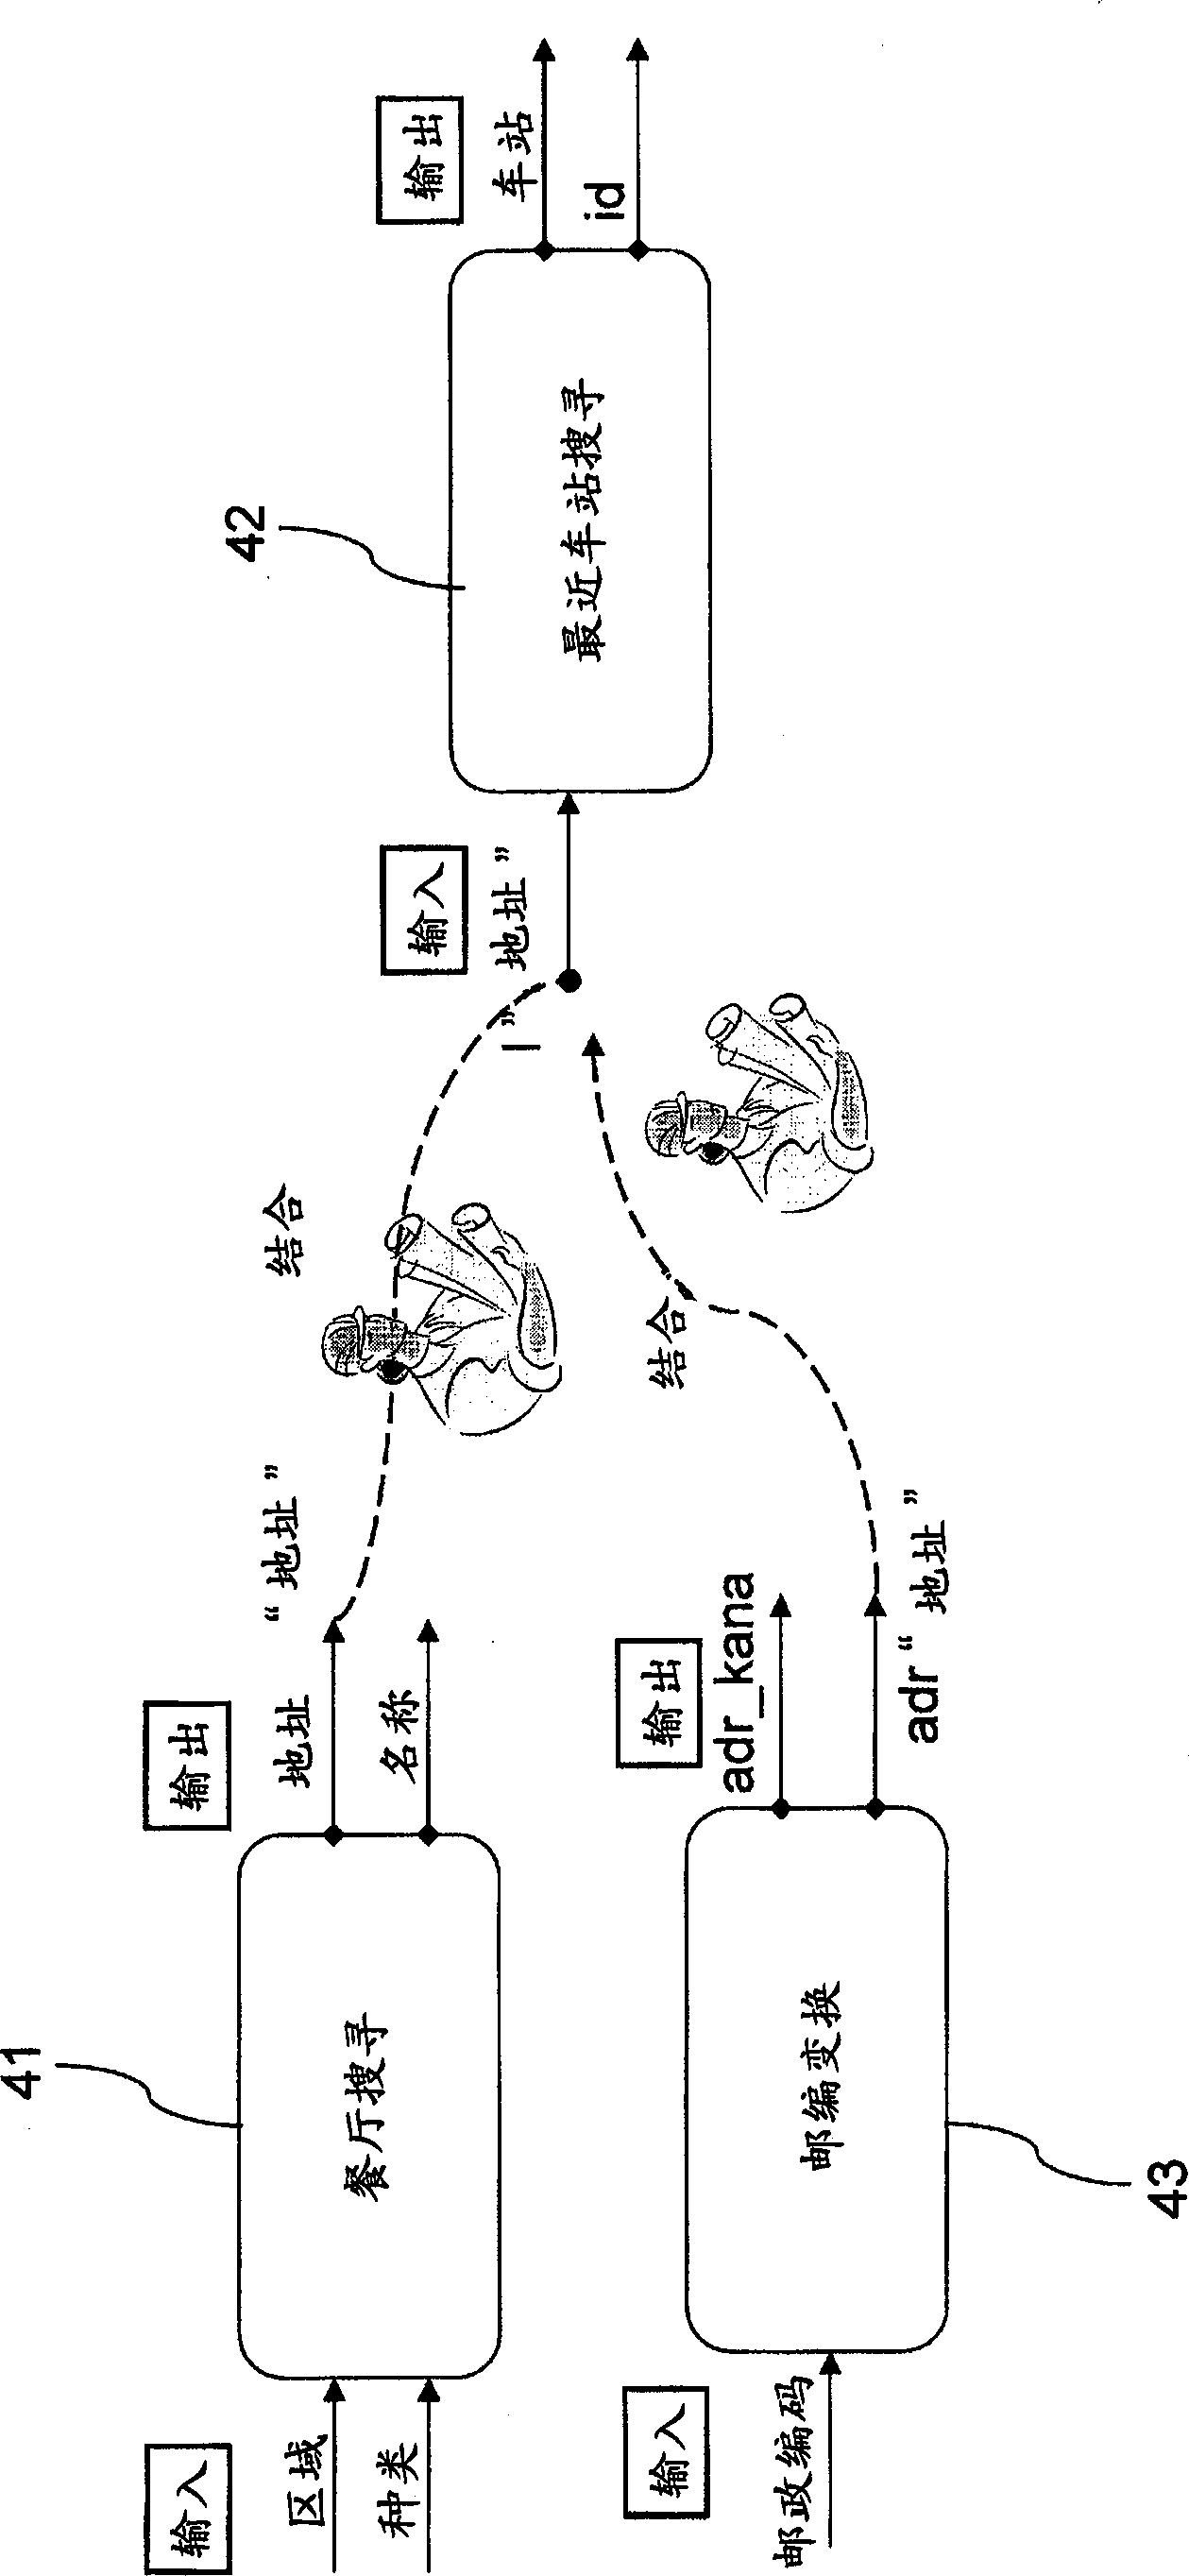 Apparatus and method for supporting data linkage among plurality of applications